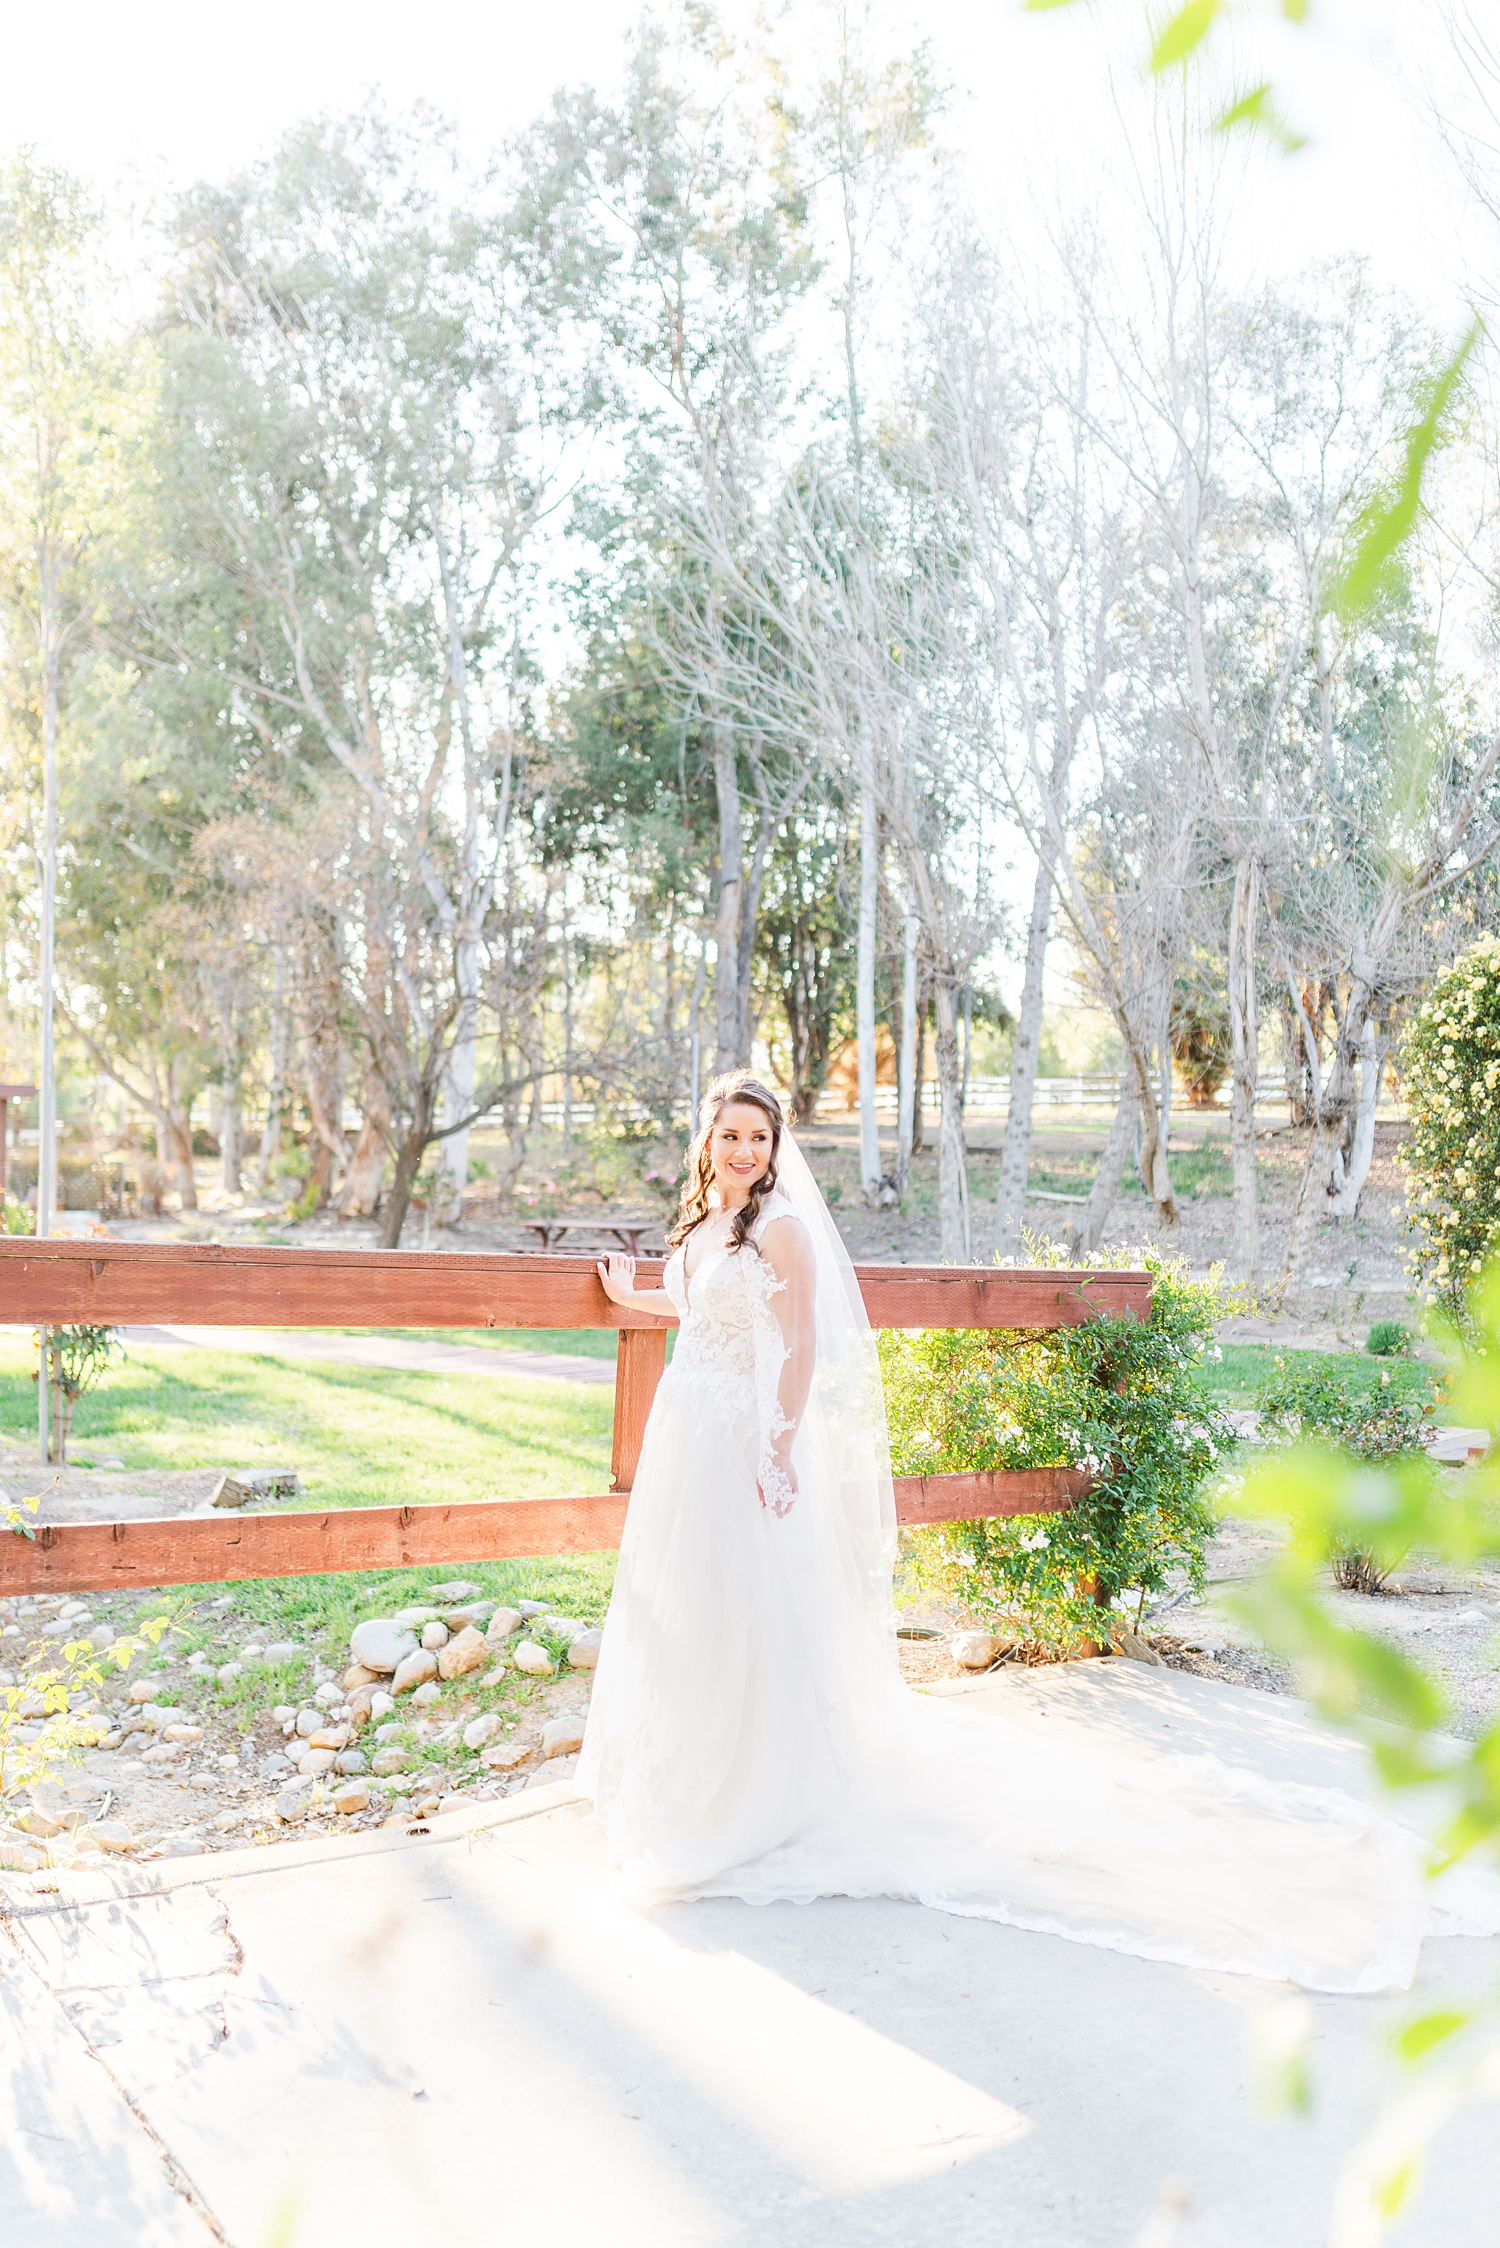 Bridal Session in a winery in temecula from a Temecula Wedding Photographer_0009.jpg